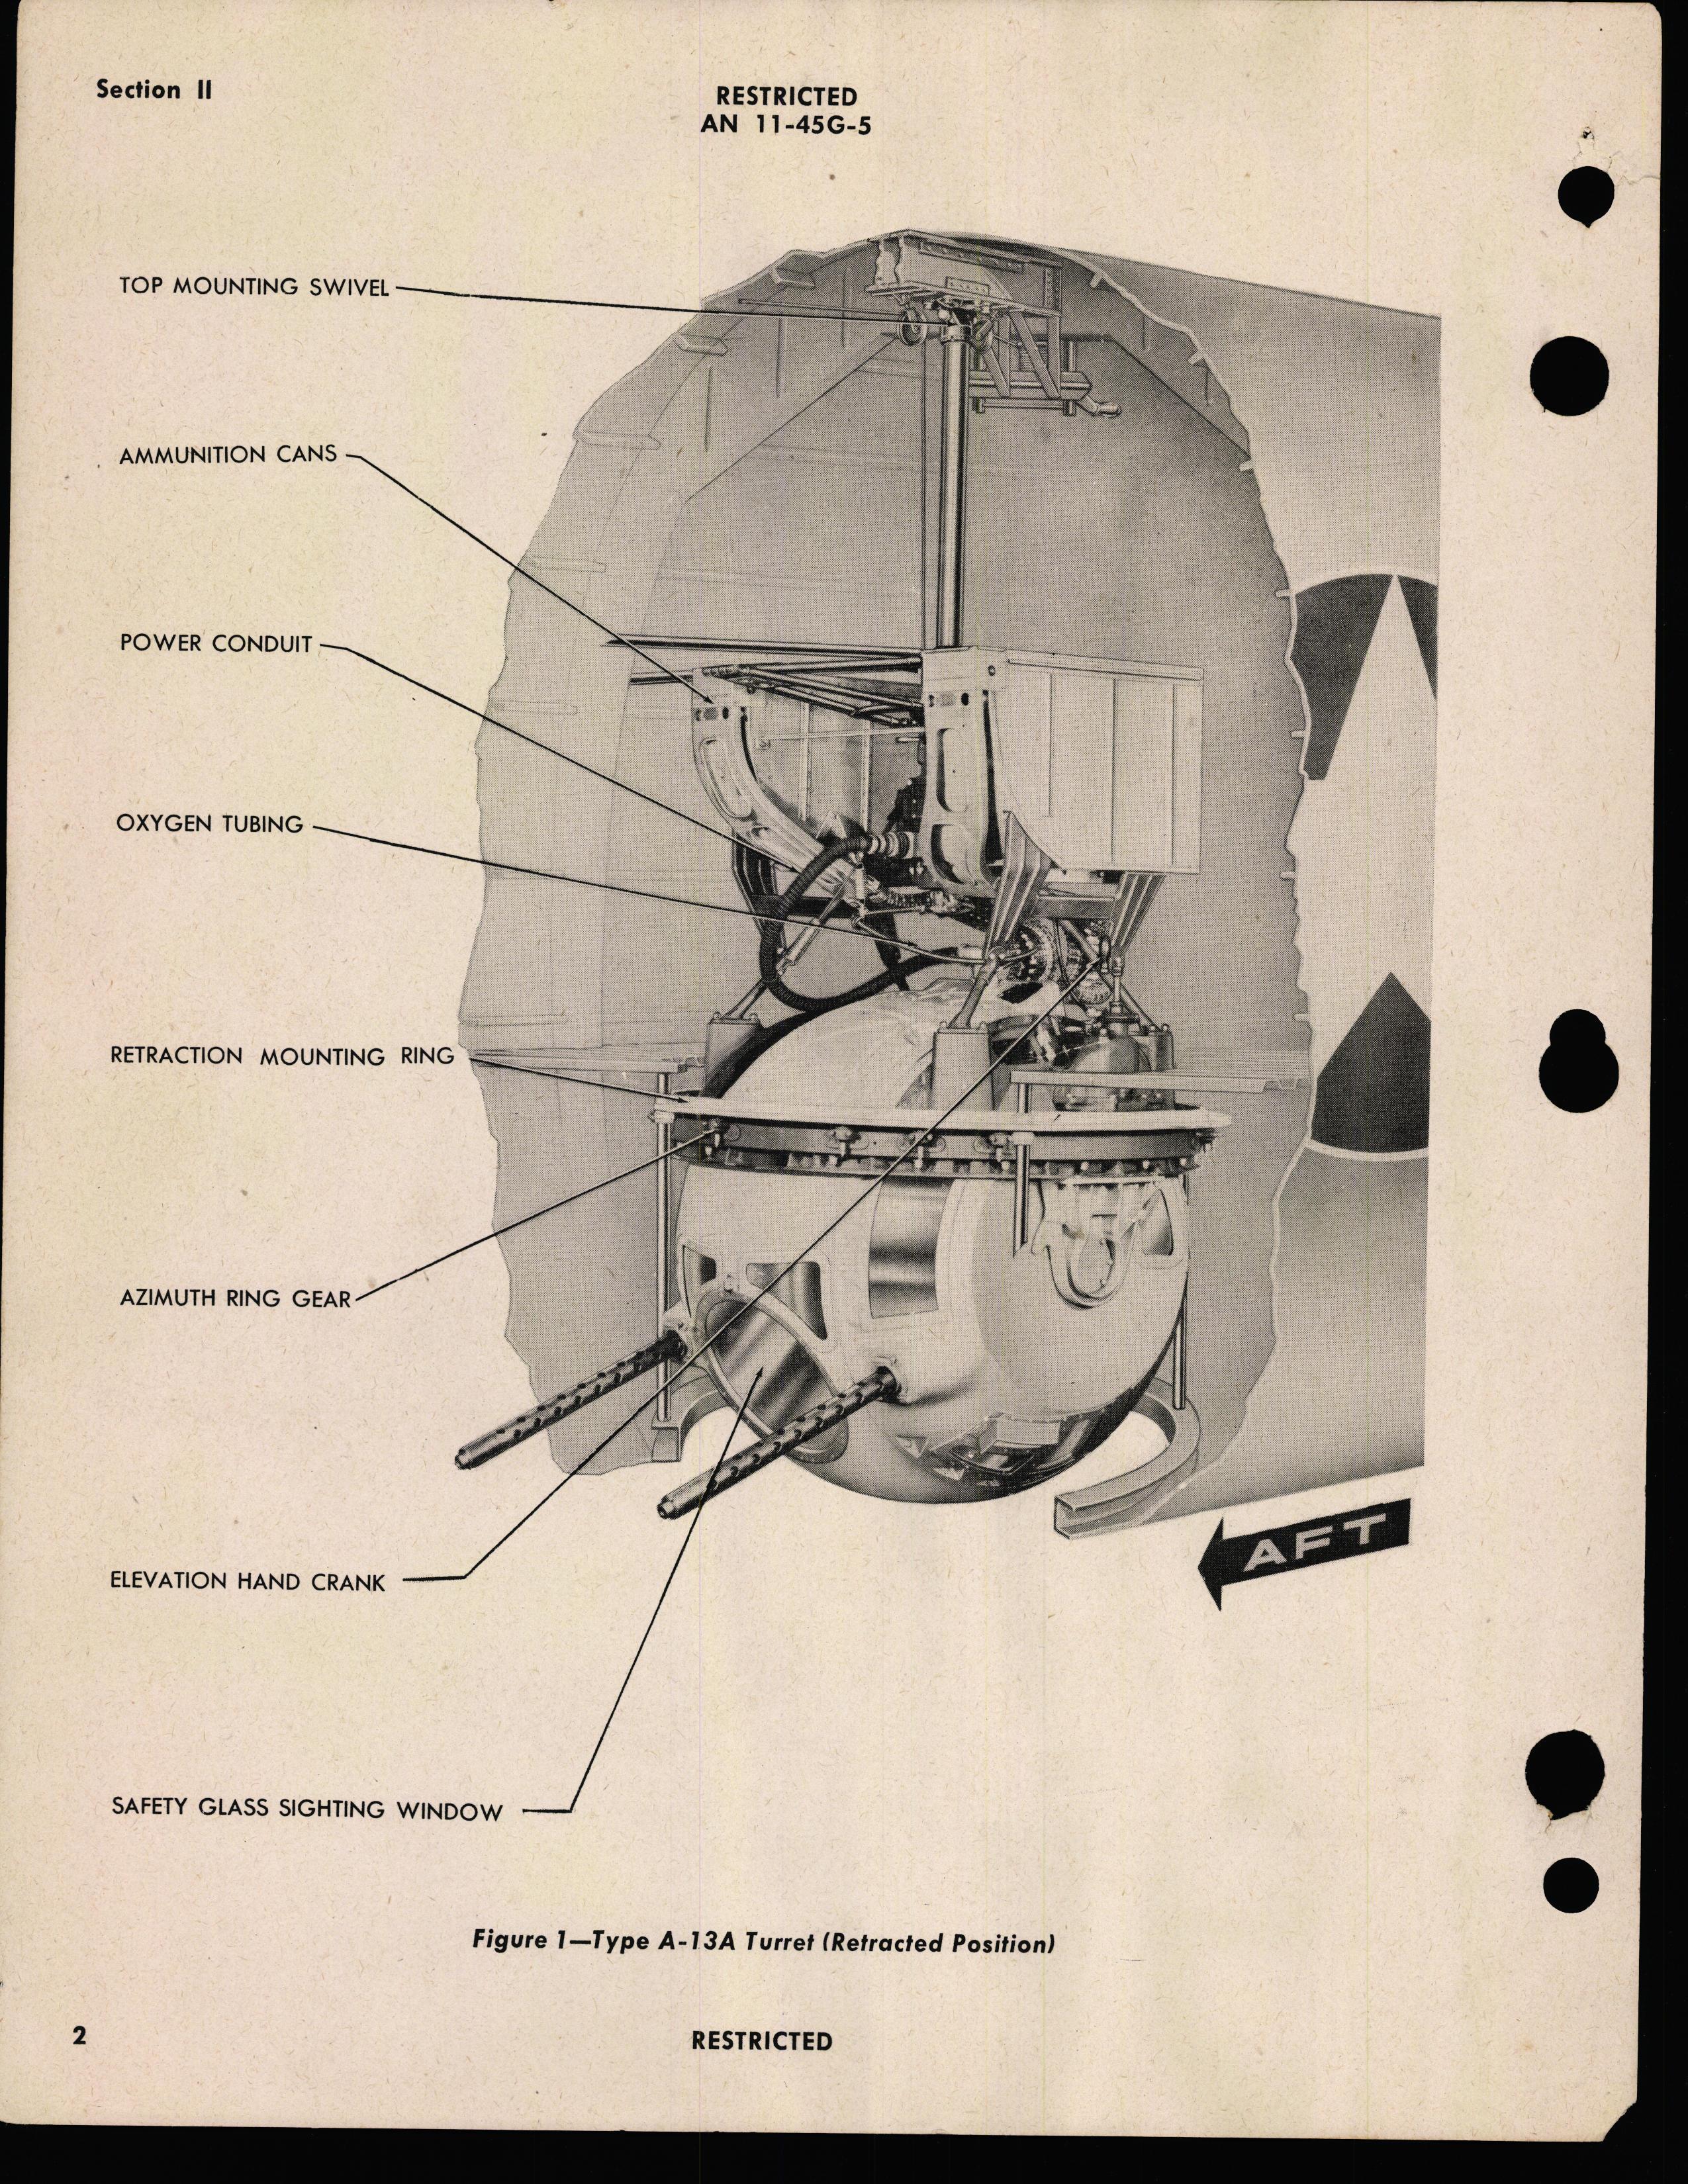 Sample page 6 from AirCorps Library document: Handbook of Instruction with Parts Catalog for Lower Ball Turrets